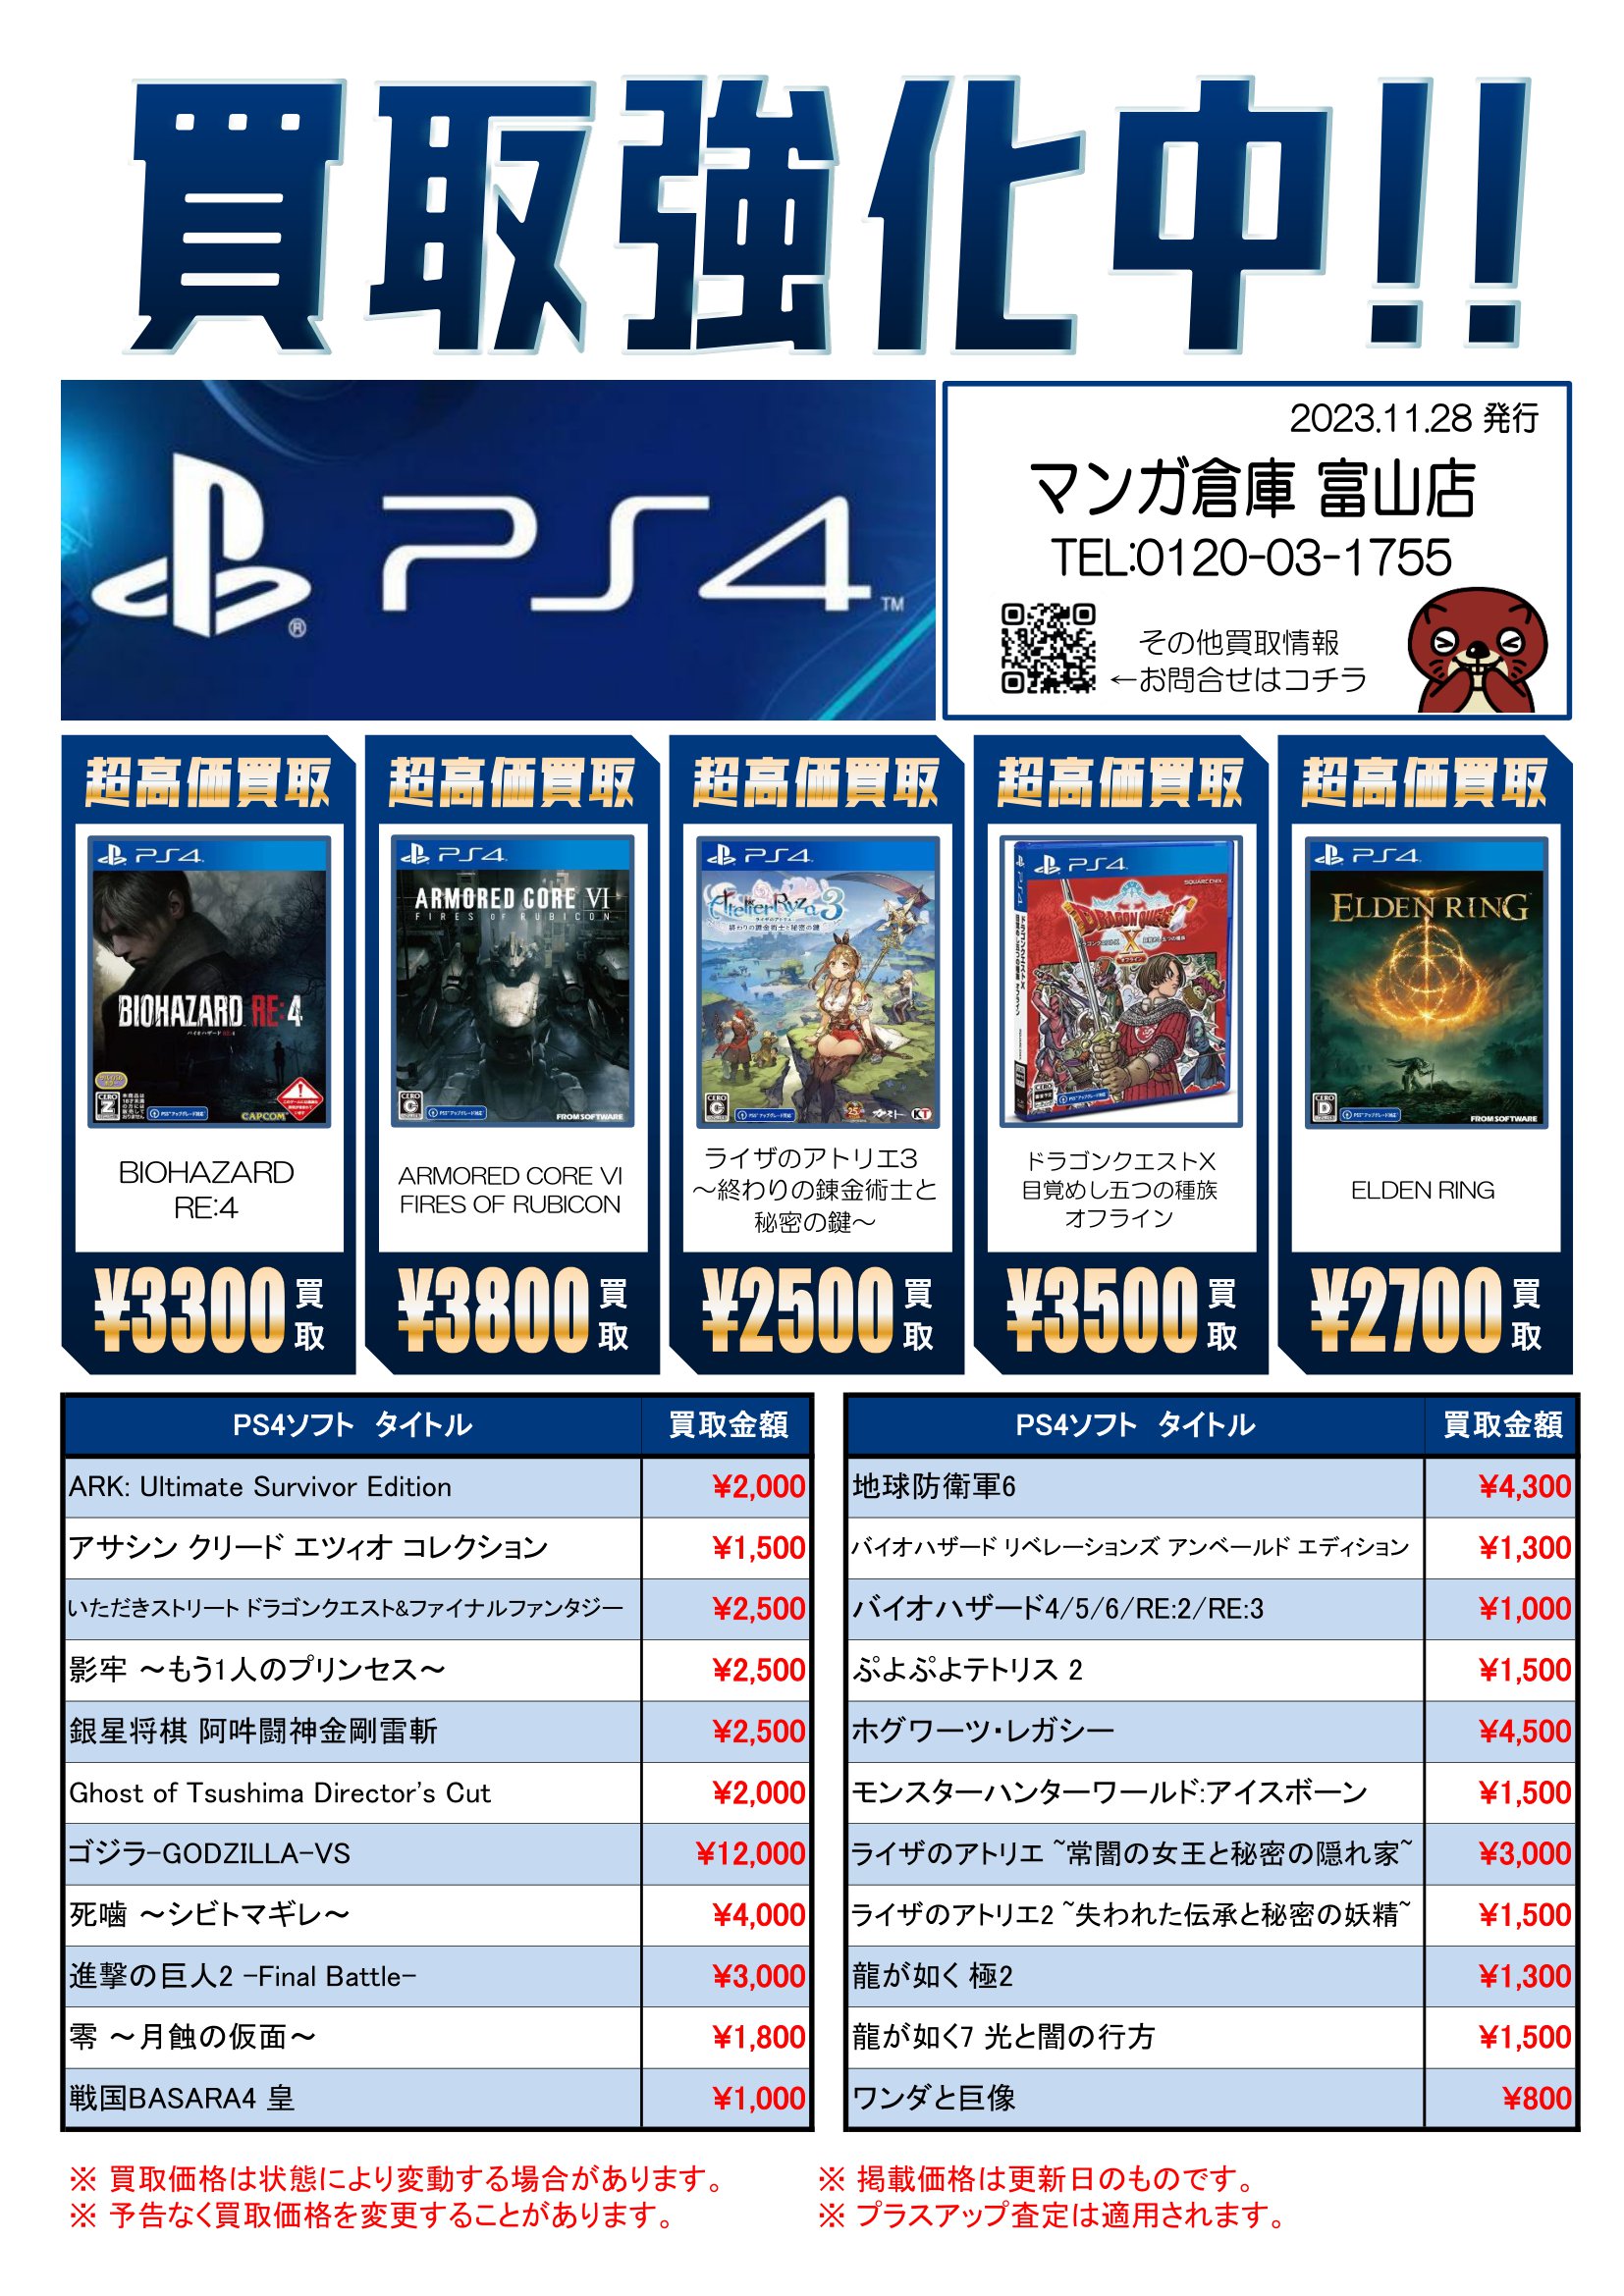 PS4・PS5ソフト買取告知更新しました！◇#ゲーム | マンガ倉庫 富山店